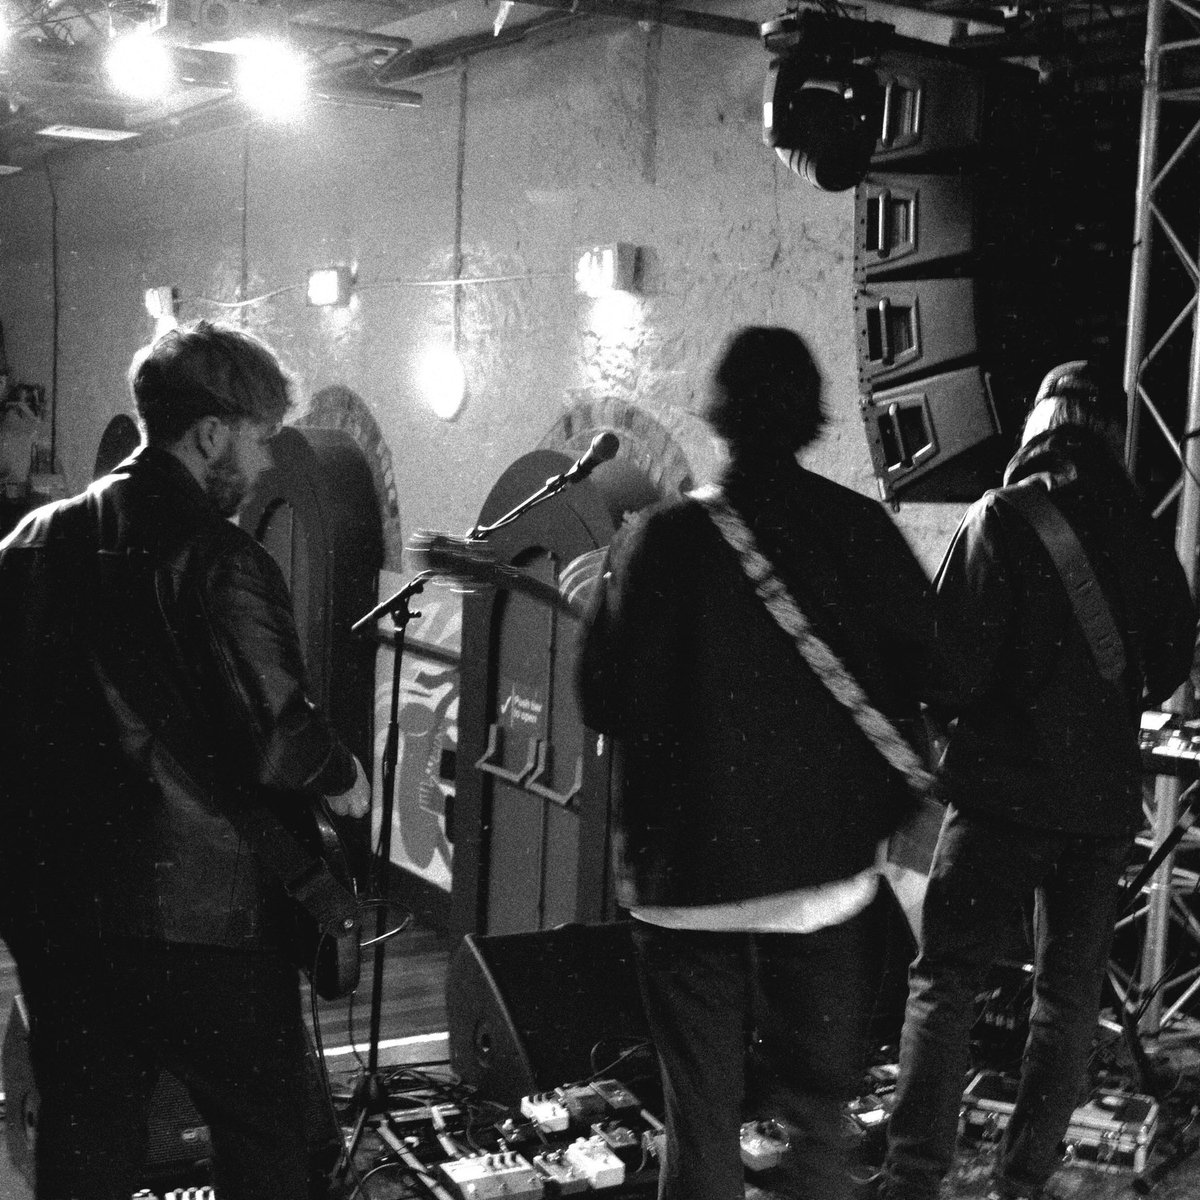 Soundcheck. 1, 2, 1, 2…Our favourite… We’re back in the Steel City this Saturday playing the line-up release party for @_FloatAlong w/ @whlungmusic Less than 10 tickets left: seetickets.com/tour/float-alo… Manchester heads….keep April 20th free….more info soon.